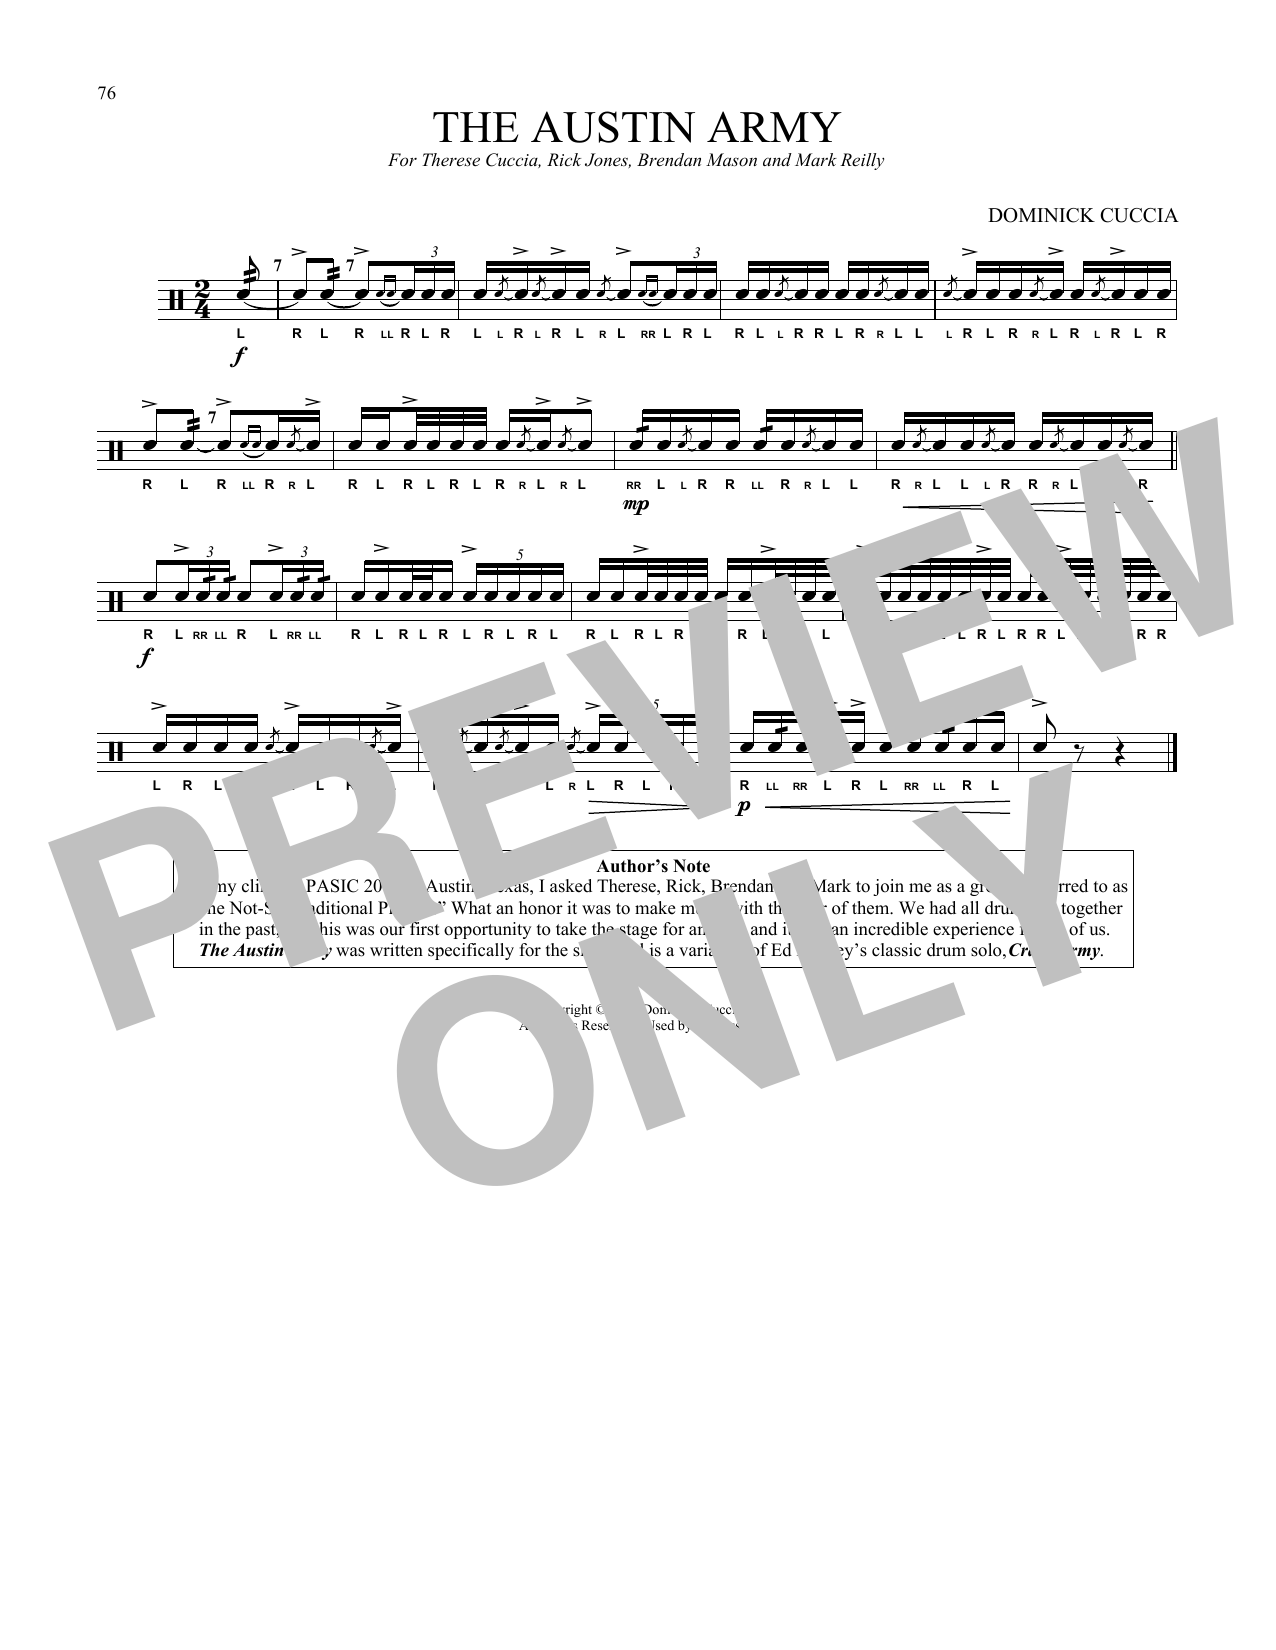 Dominick Cuccia The Austin Army sheet music notes and chords. Download Printable PDF.